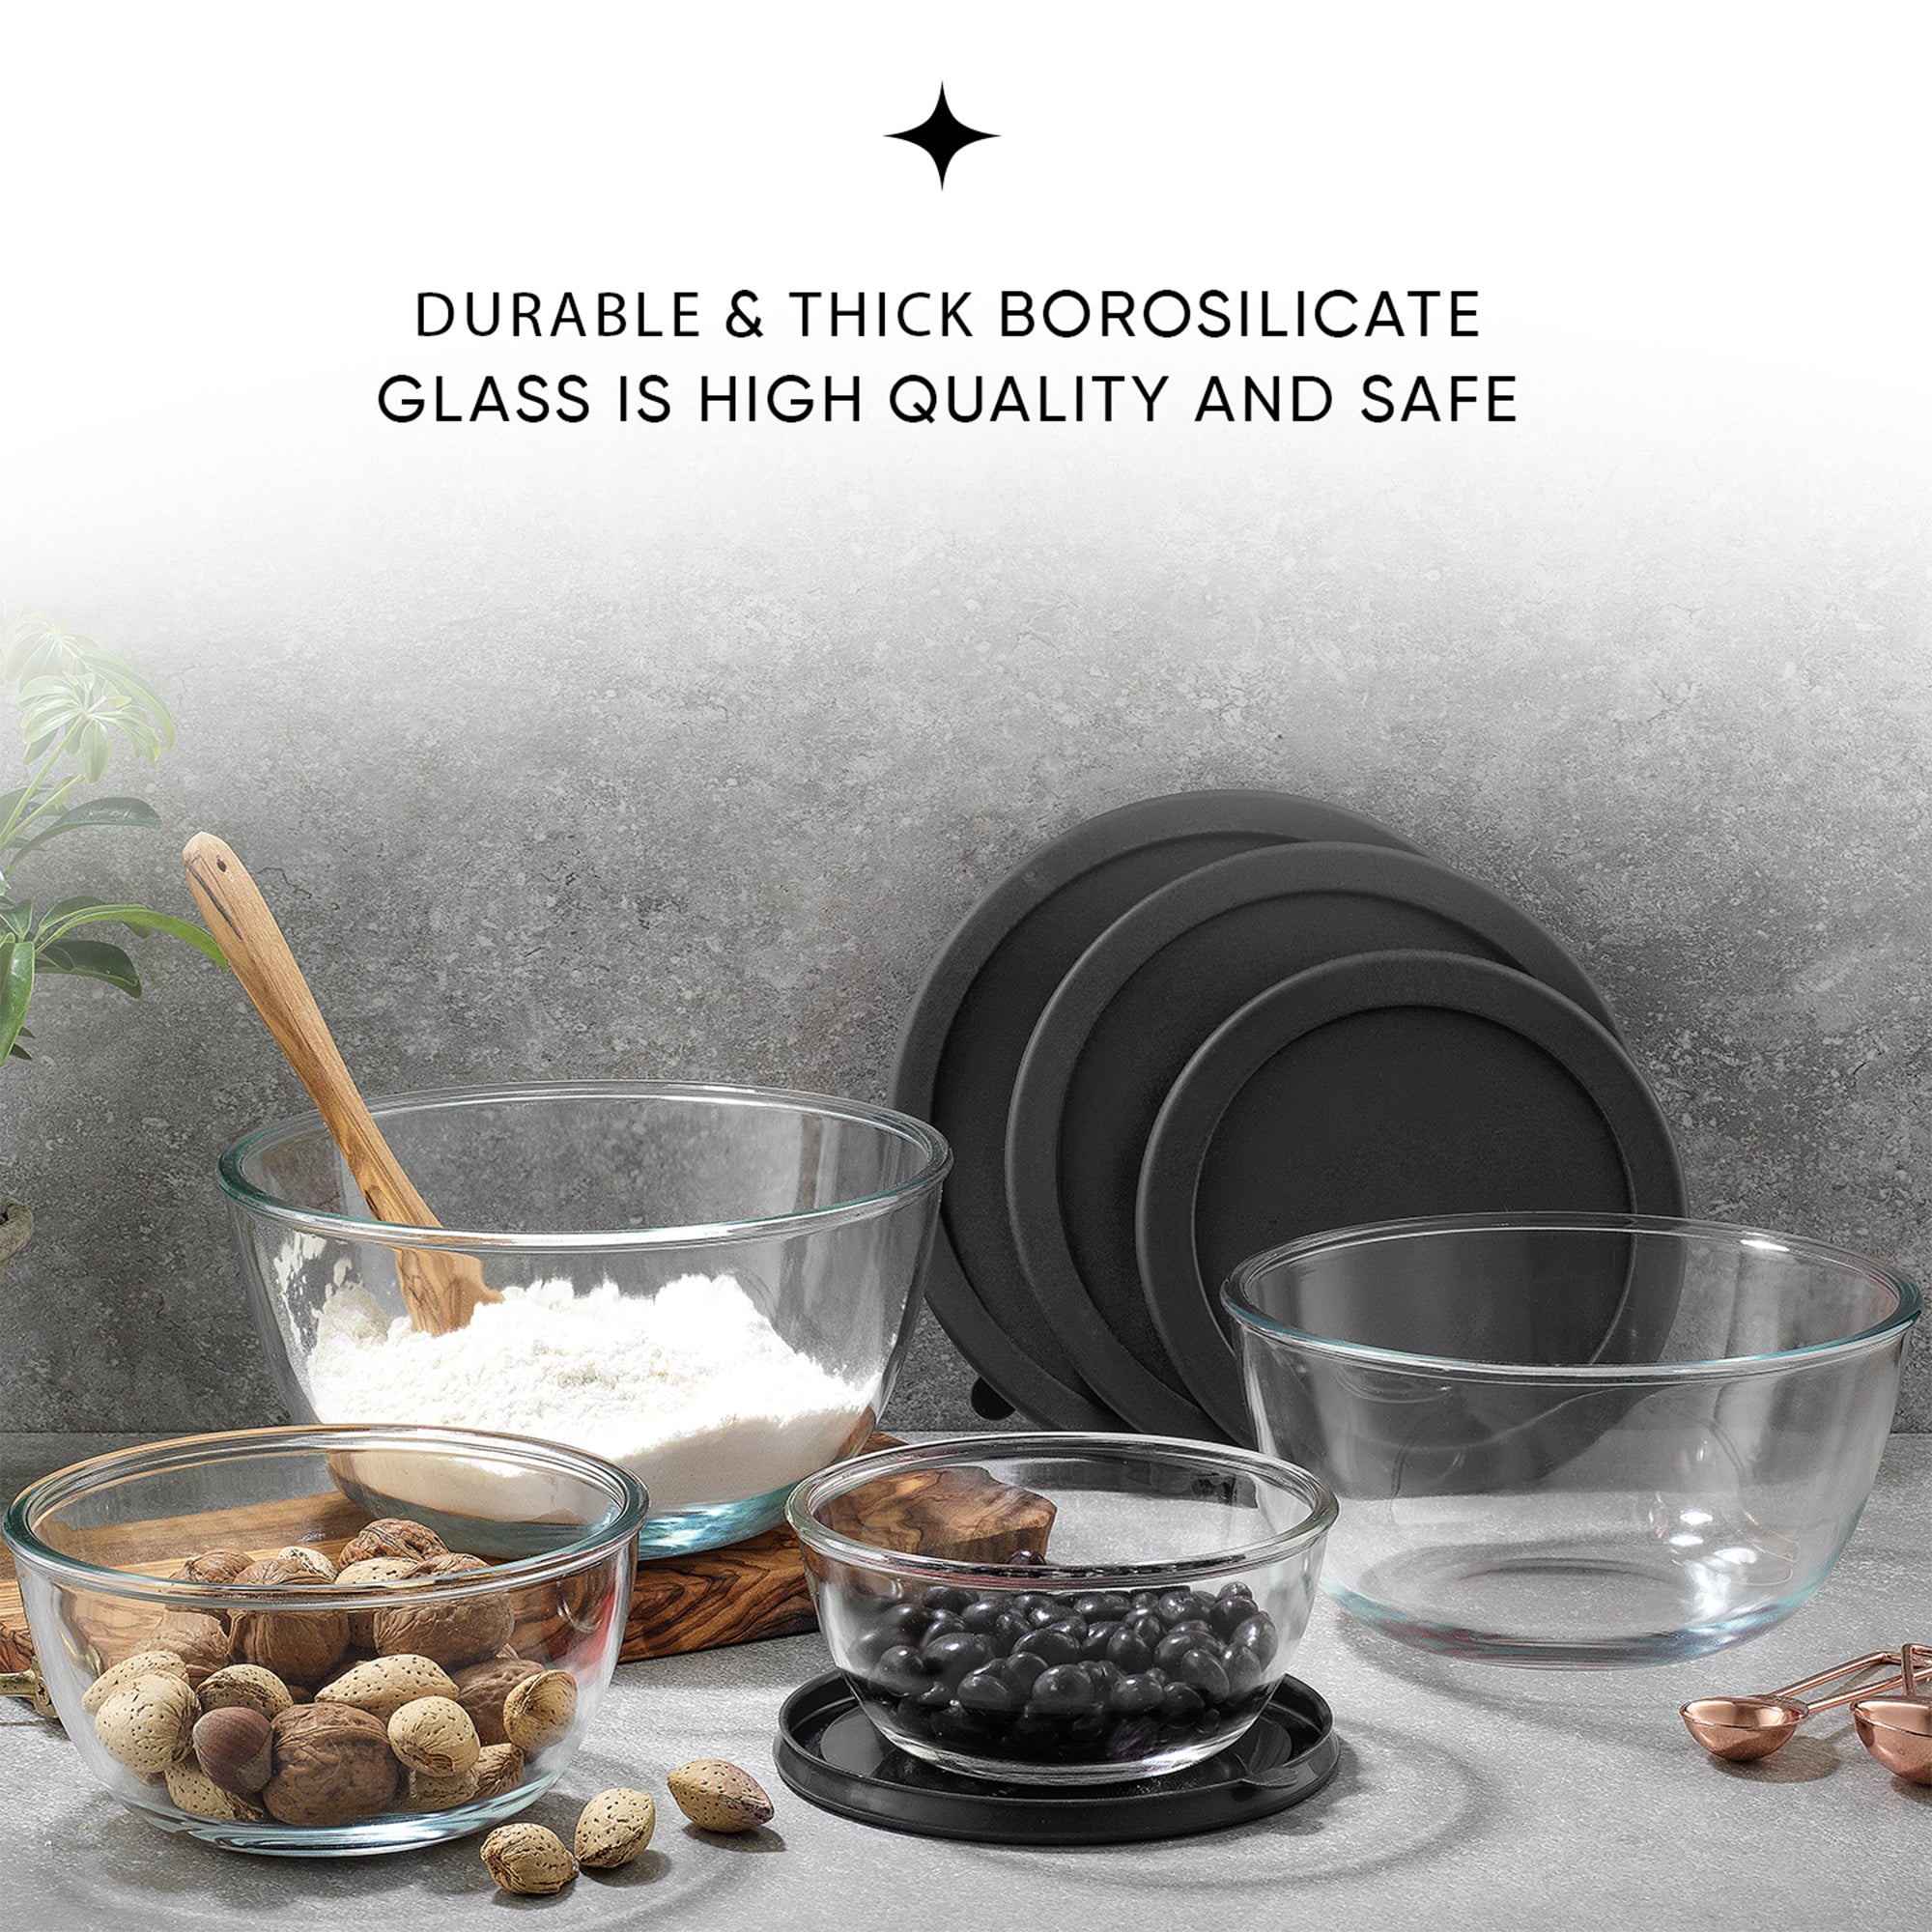 A set of four glass bowls with black lids on a table. The text  says  “DURABLE & THICK BOROSILICATE GLASS IS HIGH QUALITY AND SAFE”.